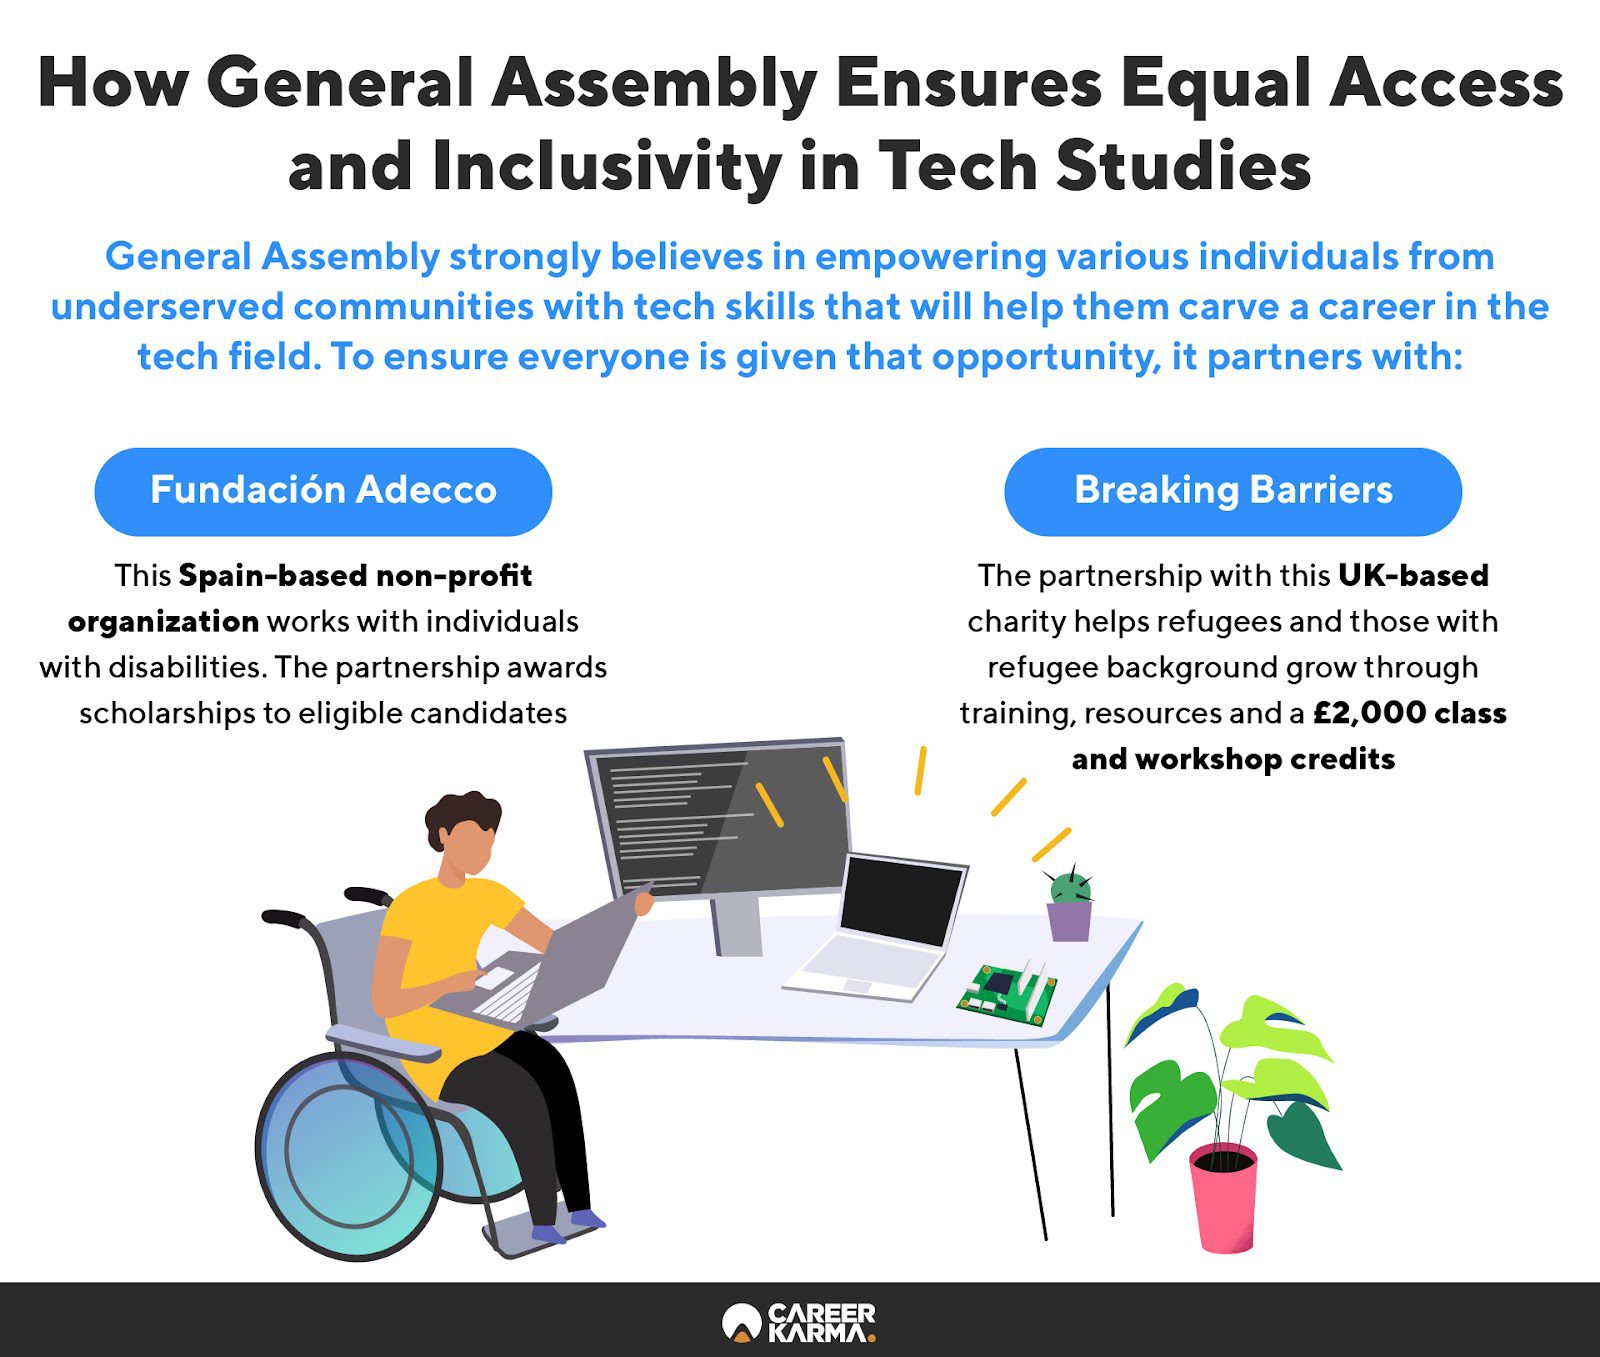 An infographic featuring General Assembly’s social impact initiatives for underserved communities